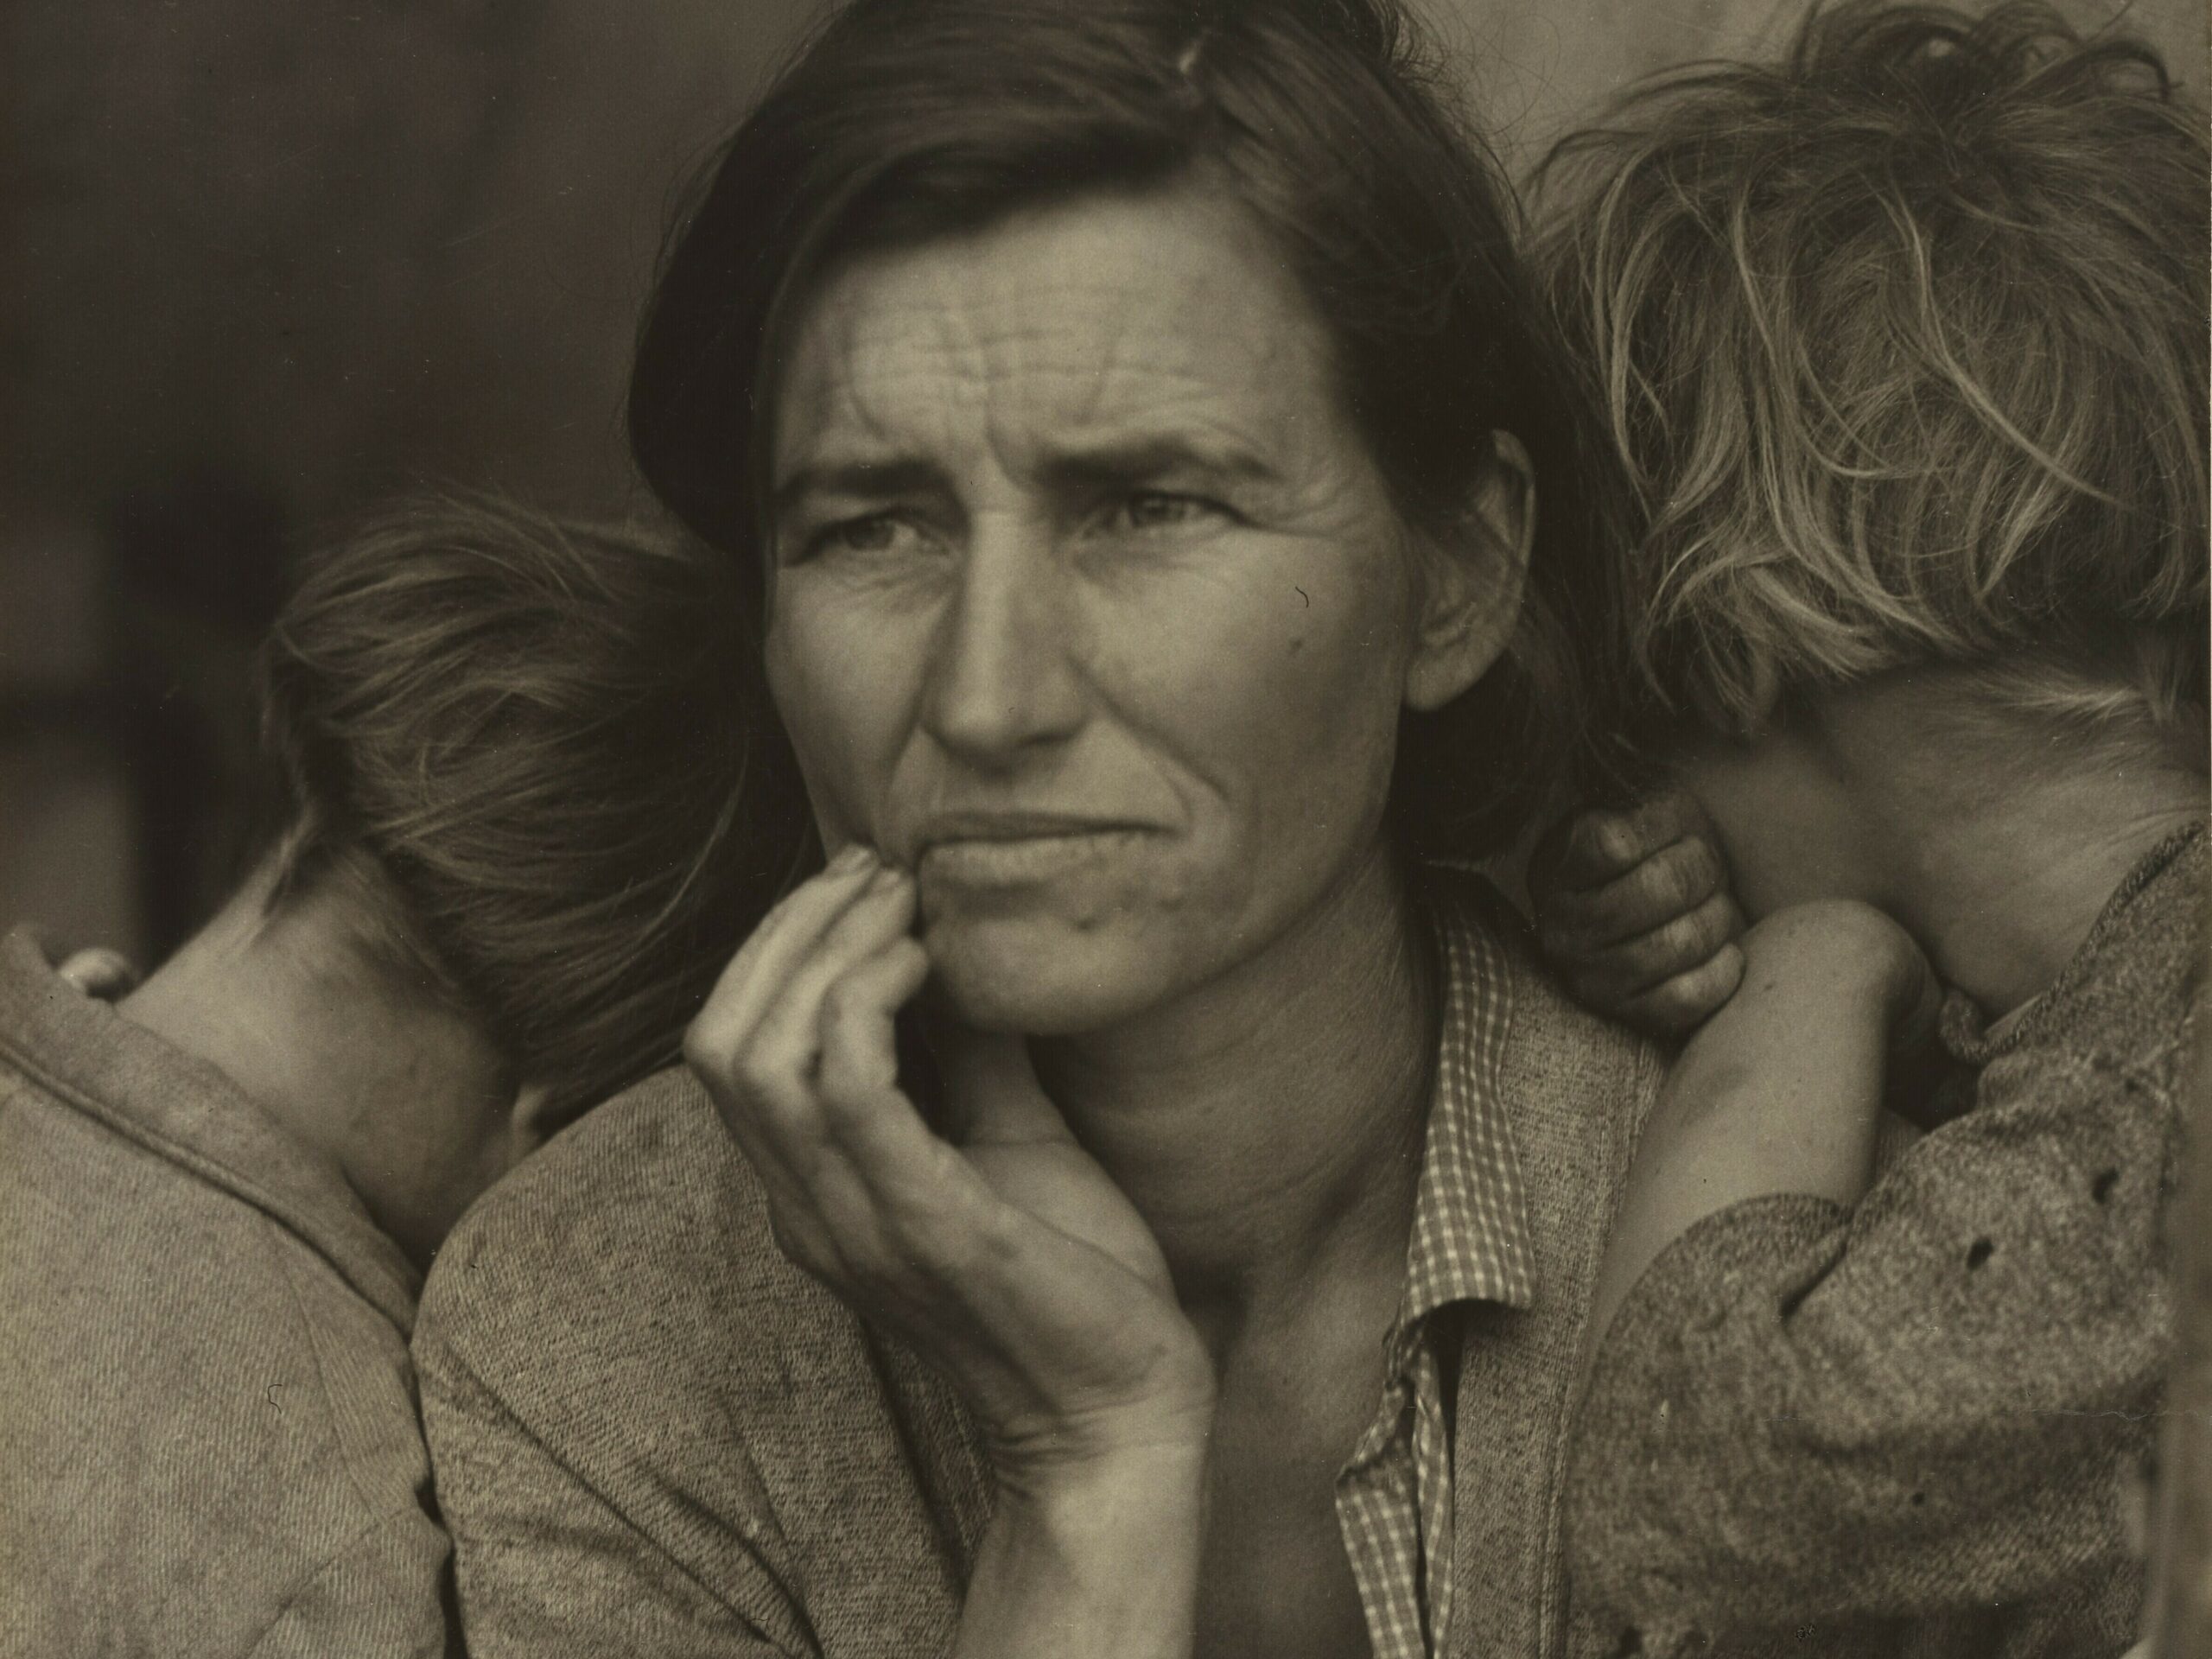 In today’s global migrant crisis, echoes of Dorothea Lange’s American photos